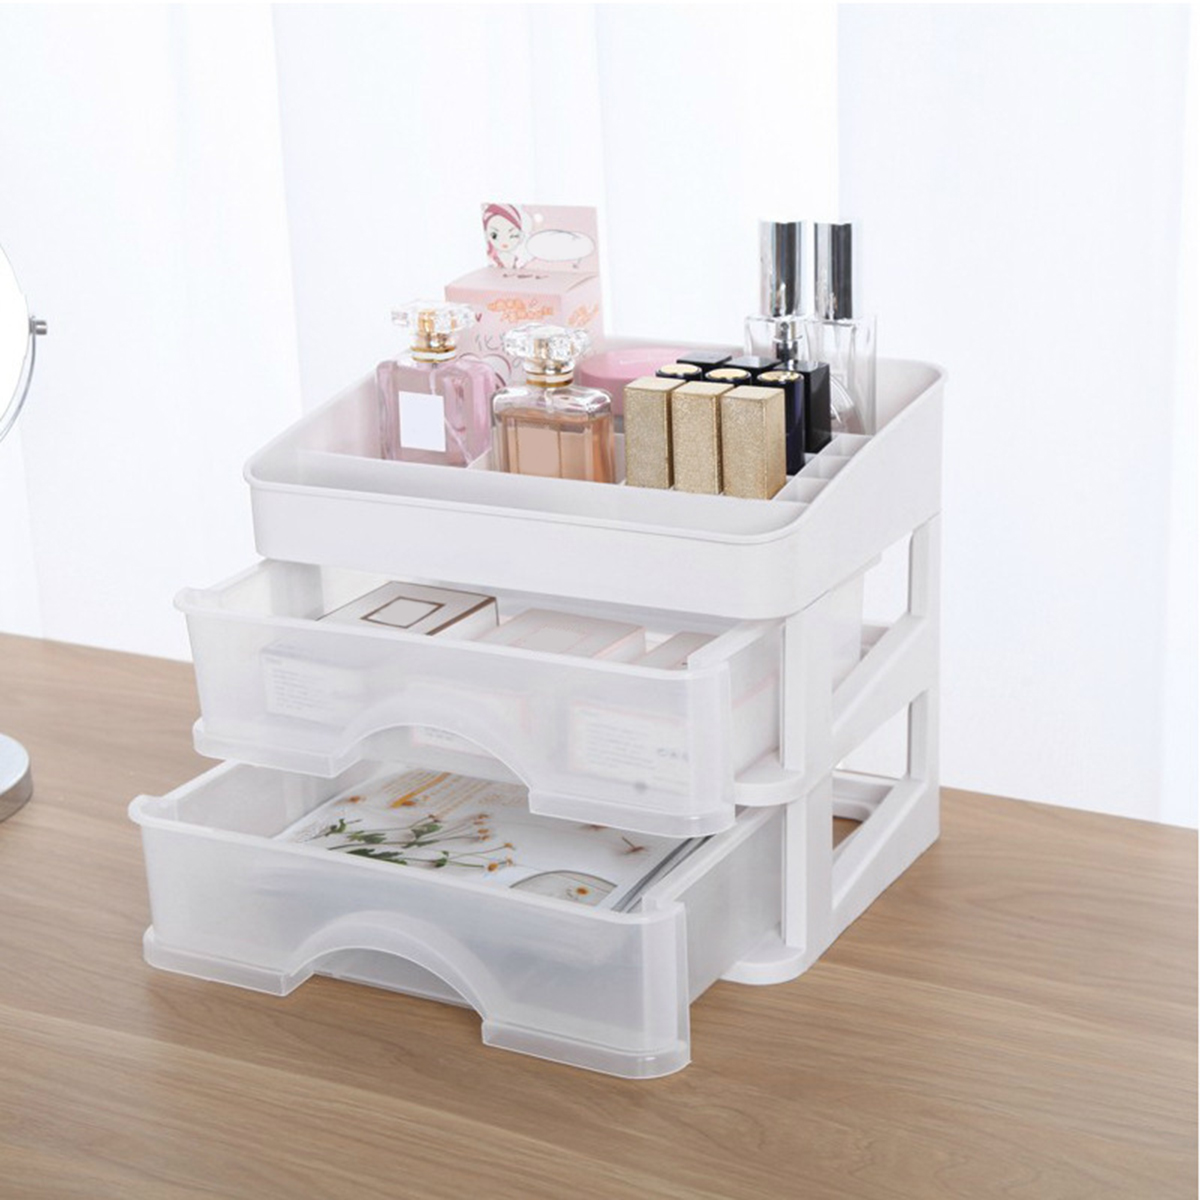 Plastic-Cosmetic-Drawer-Makeup-Organizer-Storage-Box-Container-Holder-Desktop-with-Drawer-1708816-7